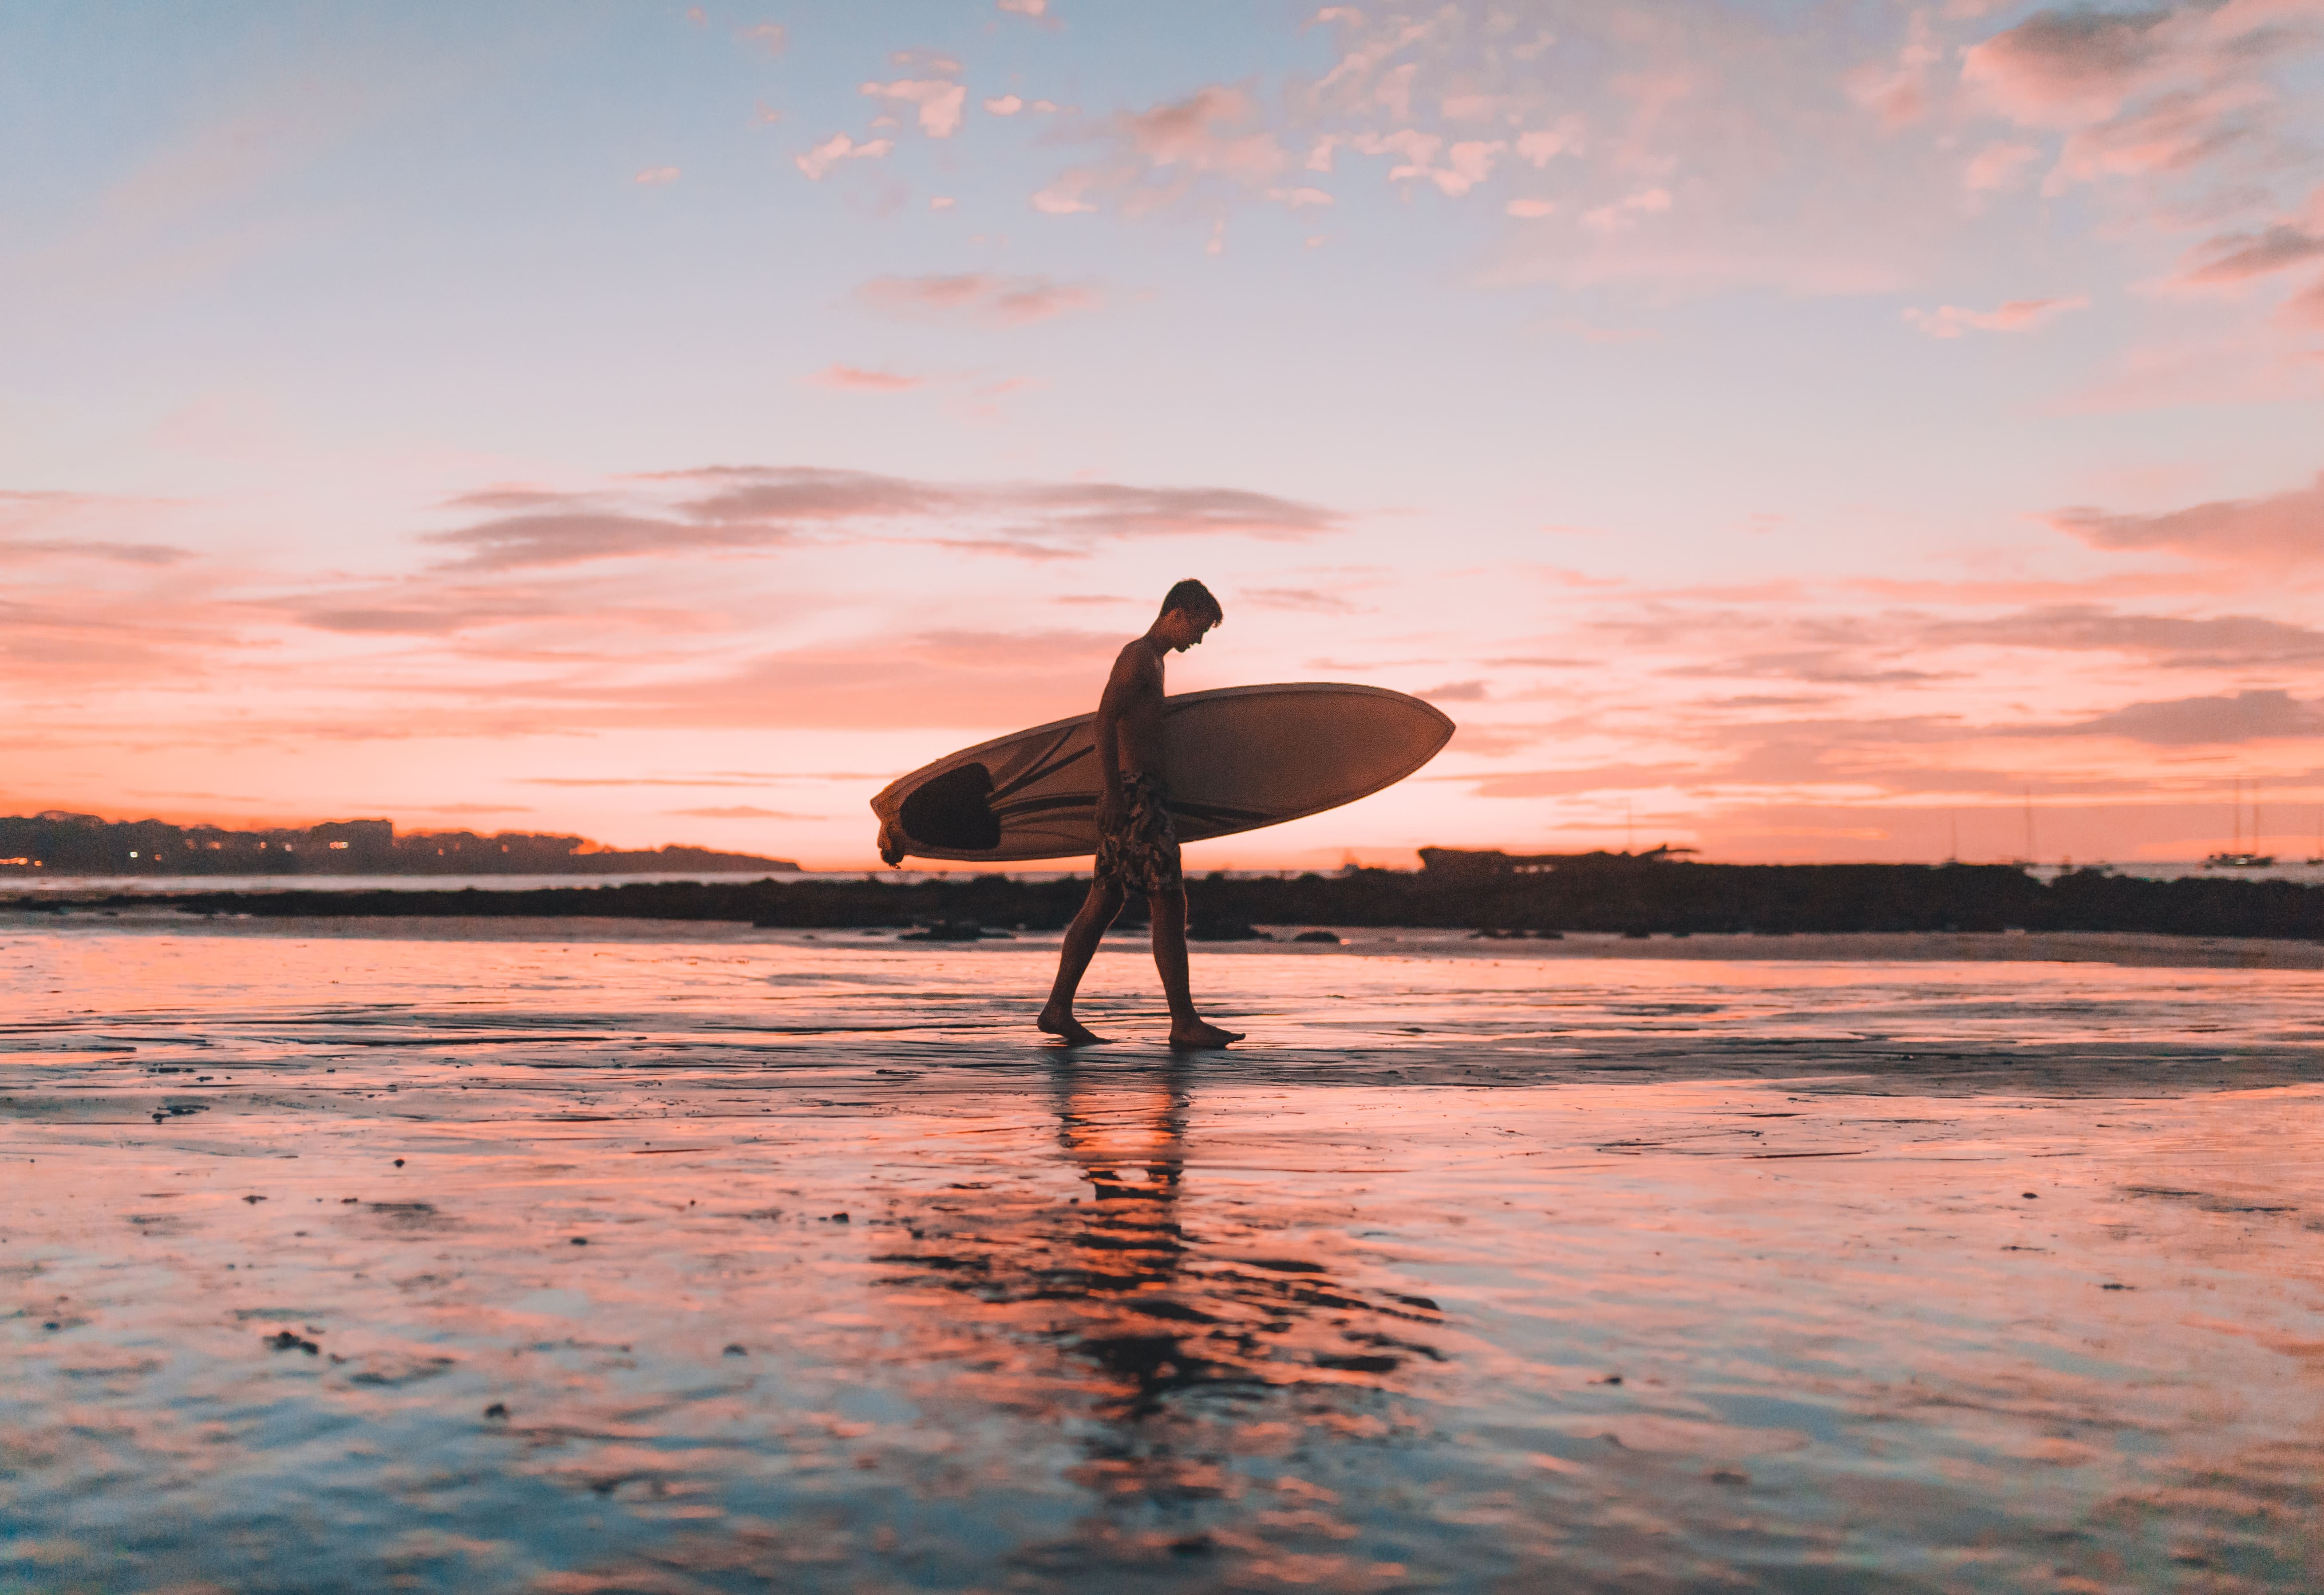 Where to stay in Costa Rica for incredible surfing? Tamarindo